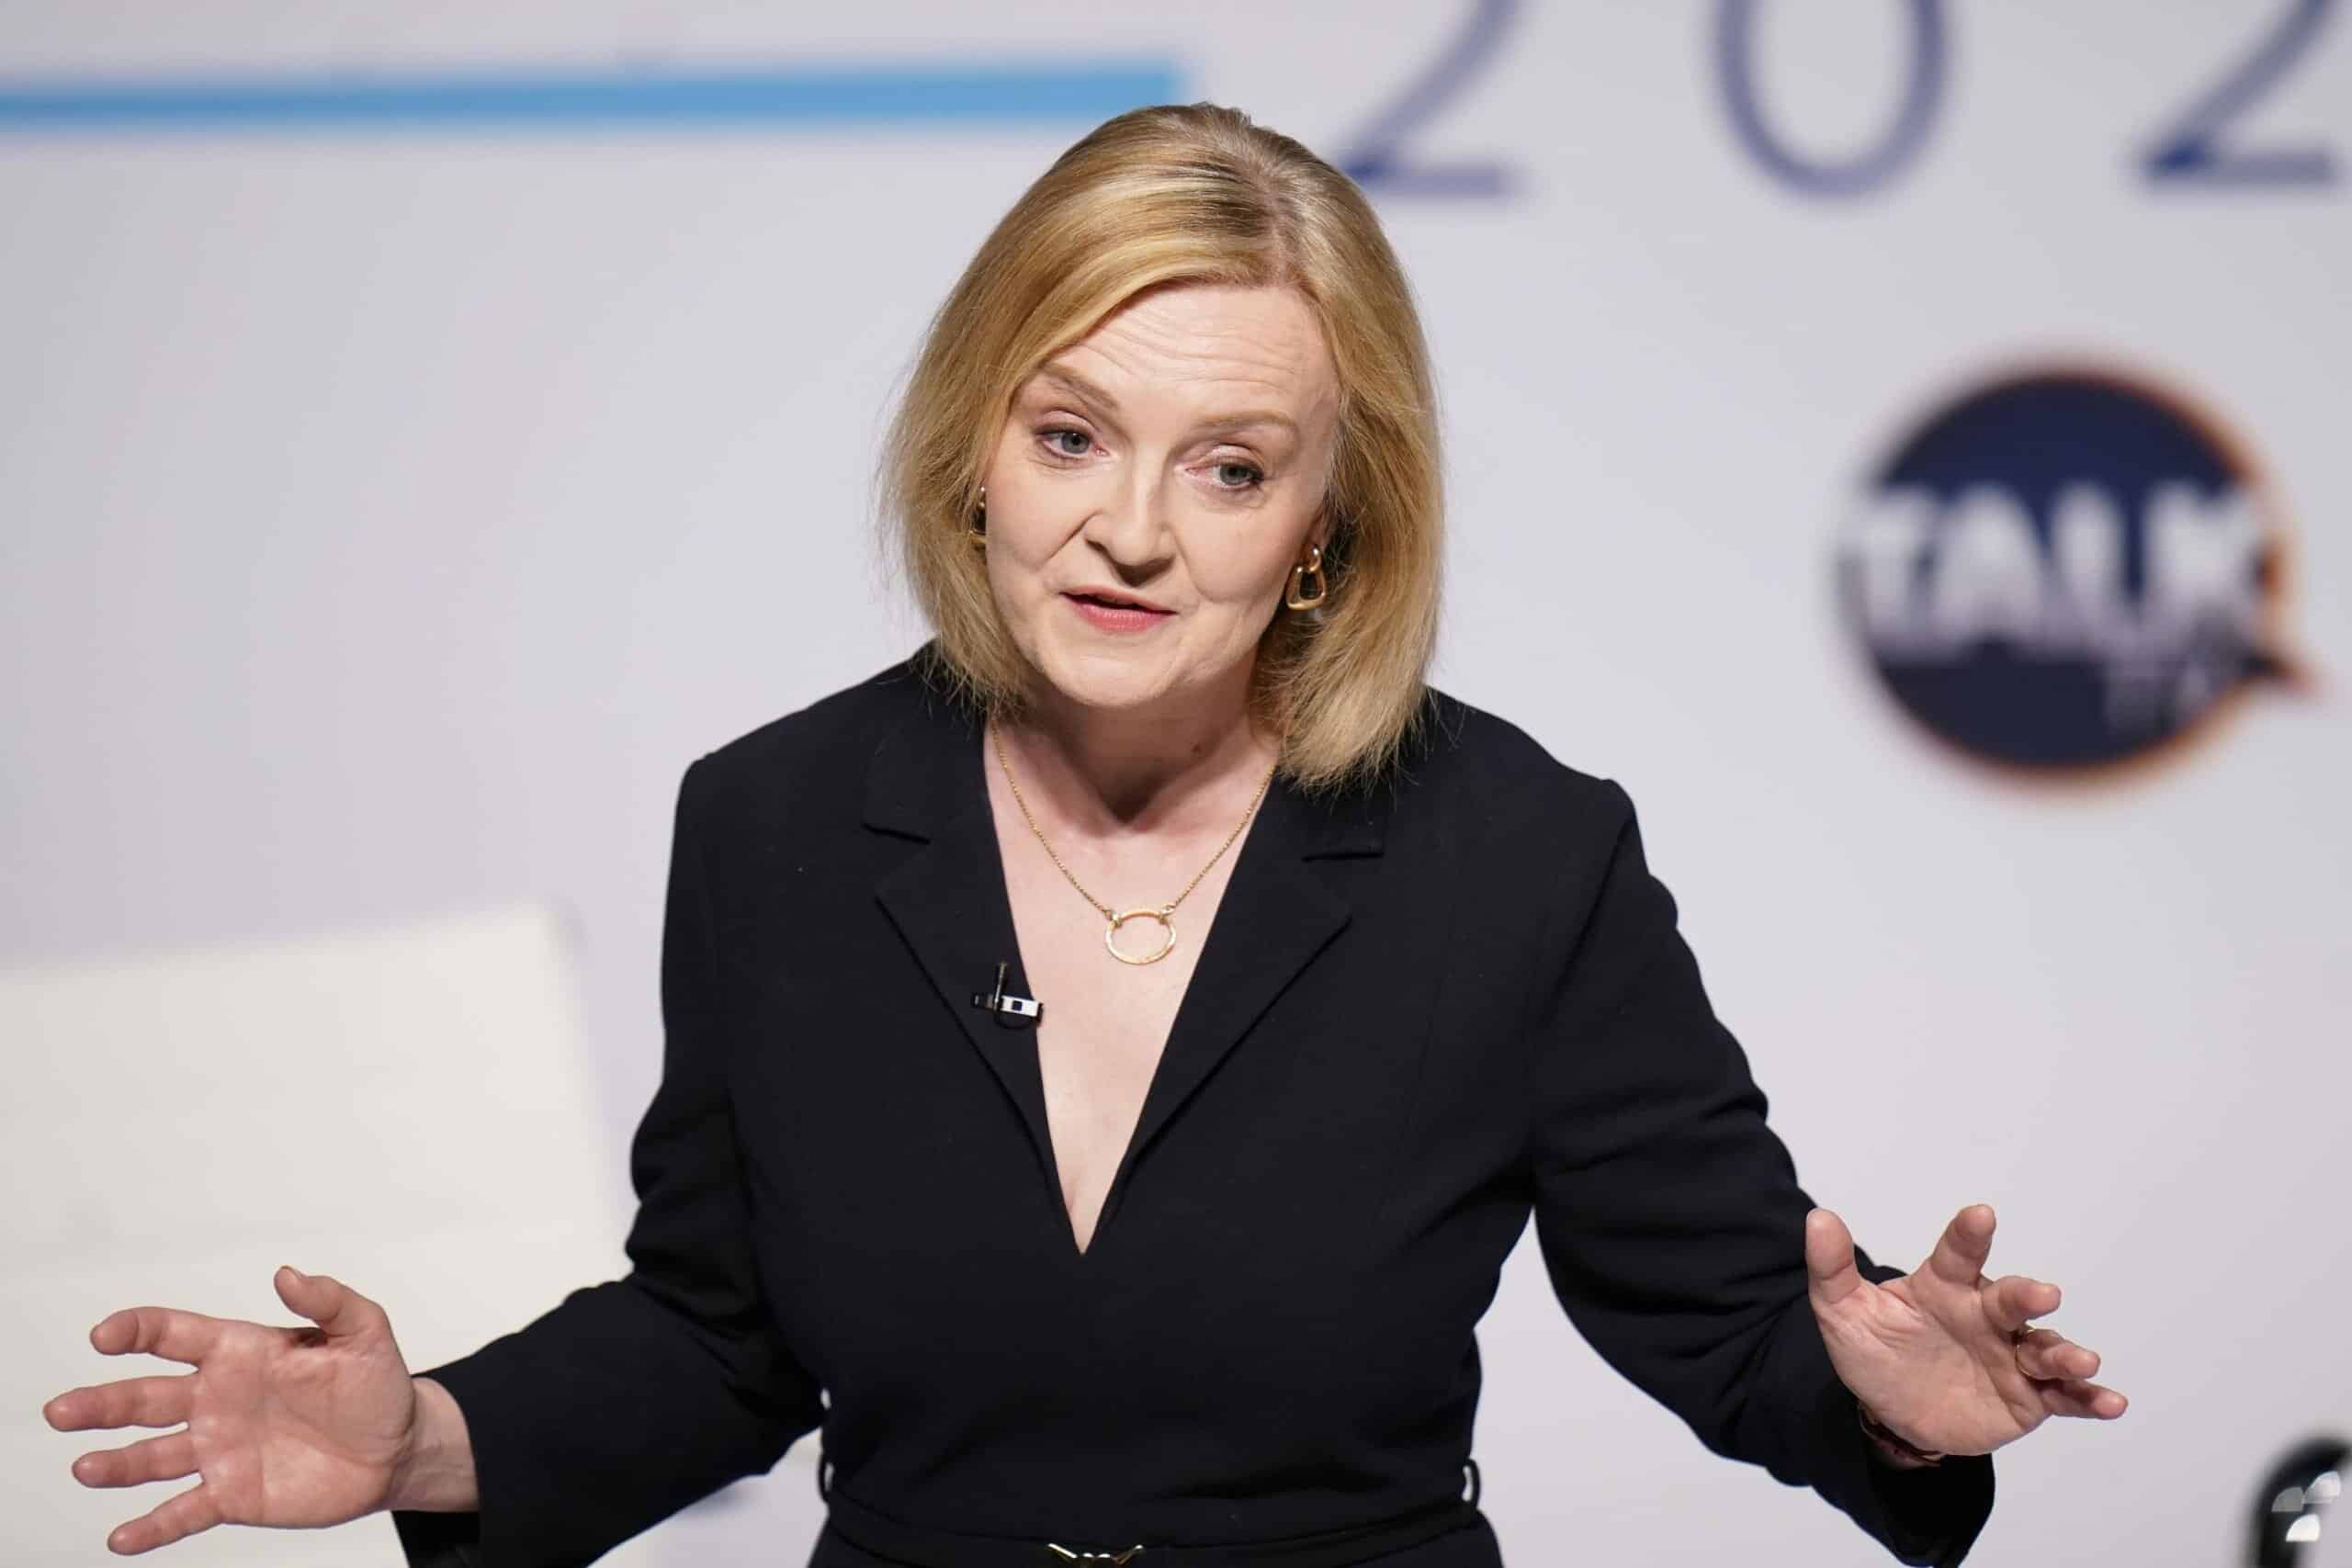 Liz Truss ‘almost certain’ to be next PM, top pollster says